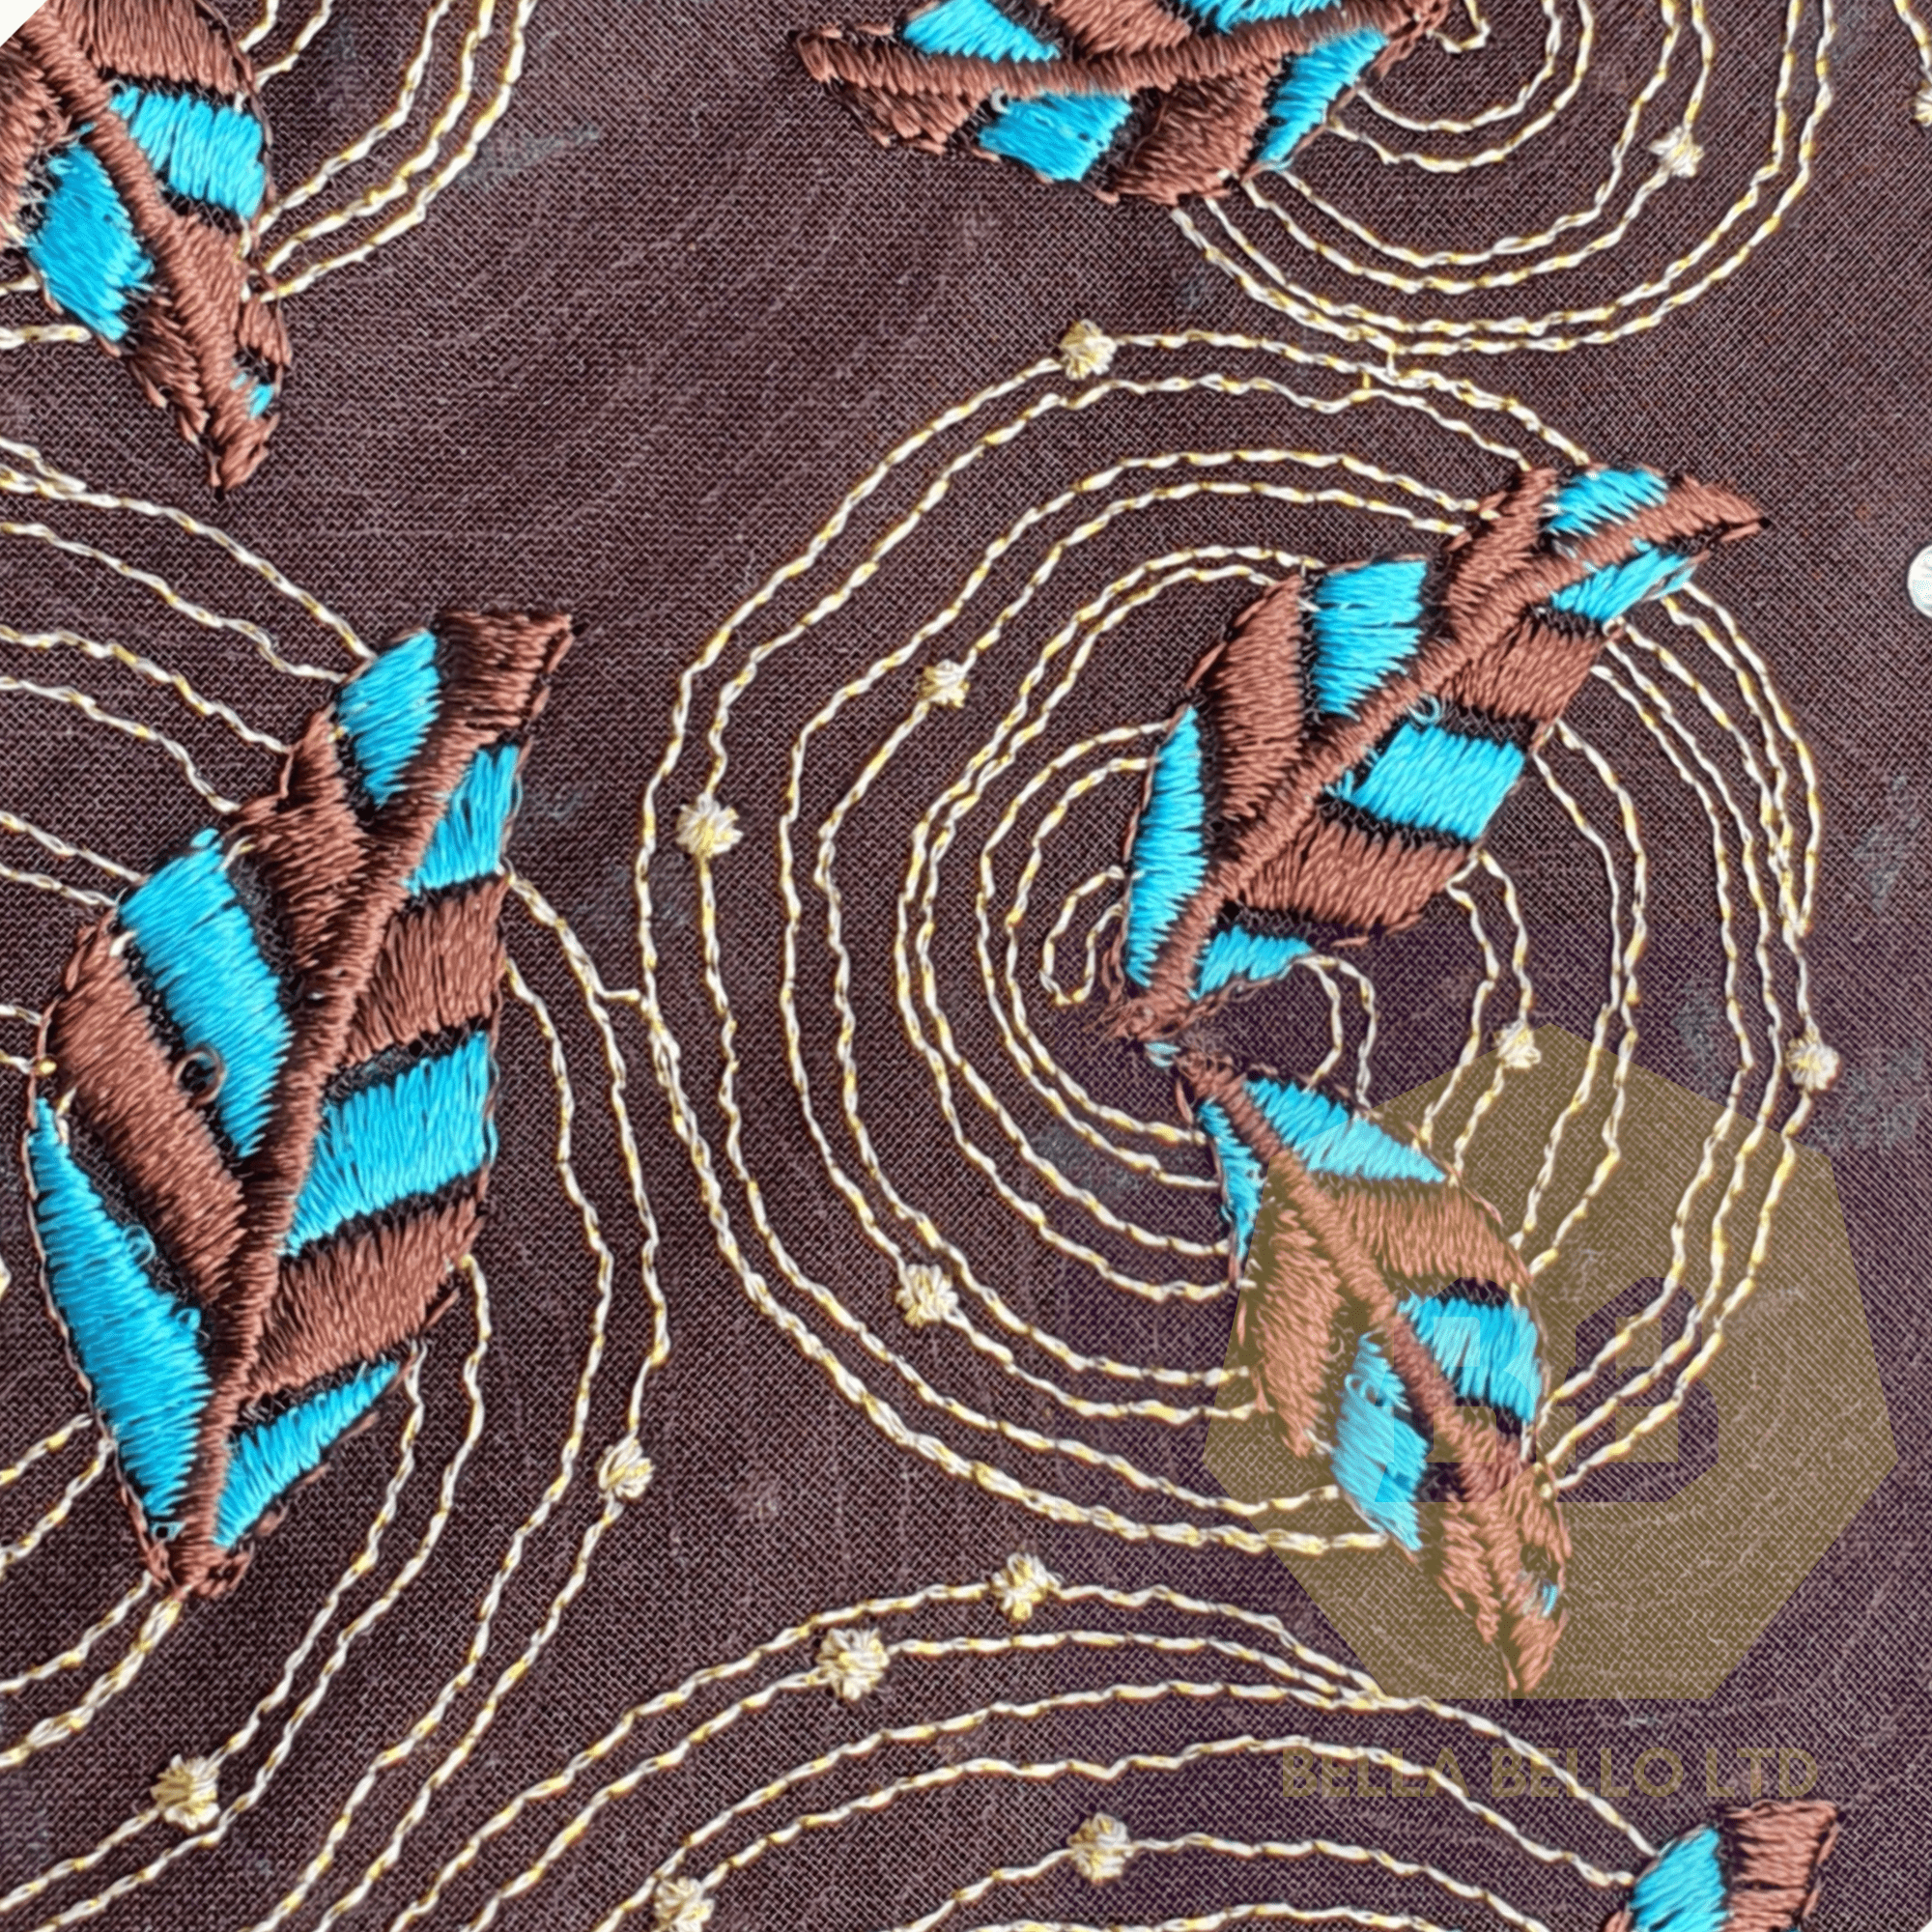 Austrian Voile Lace - Brown and Teal